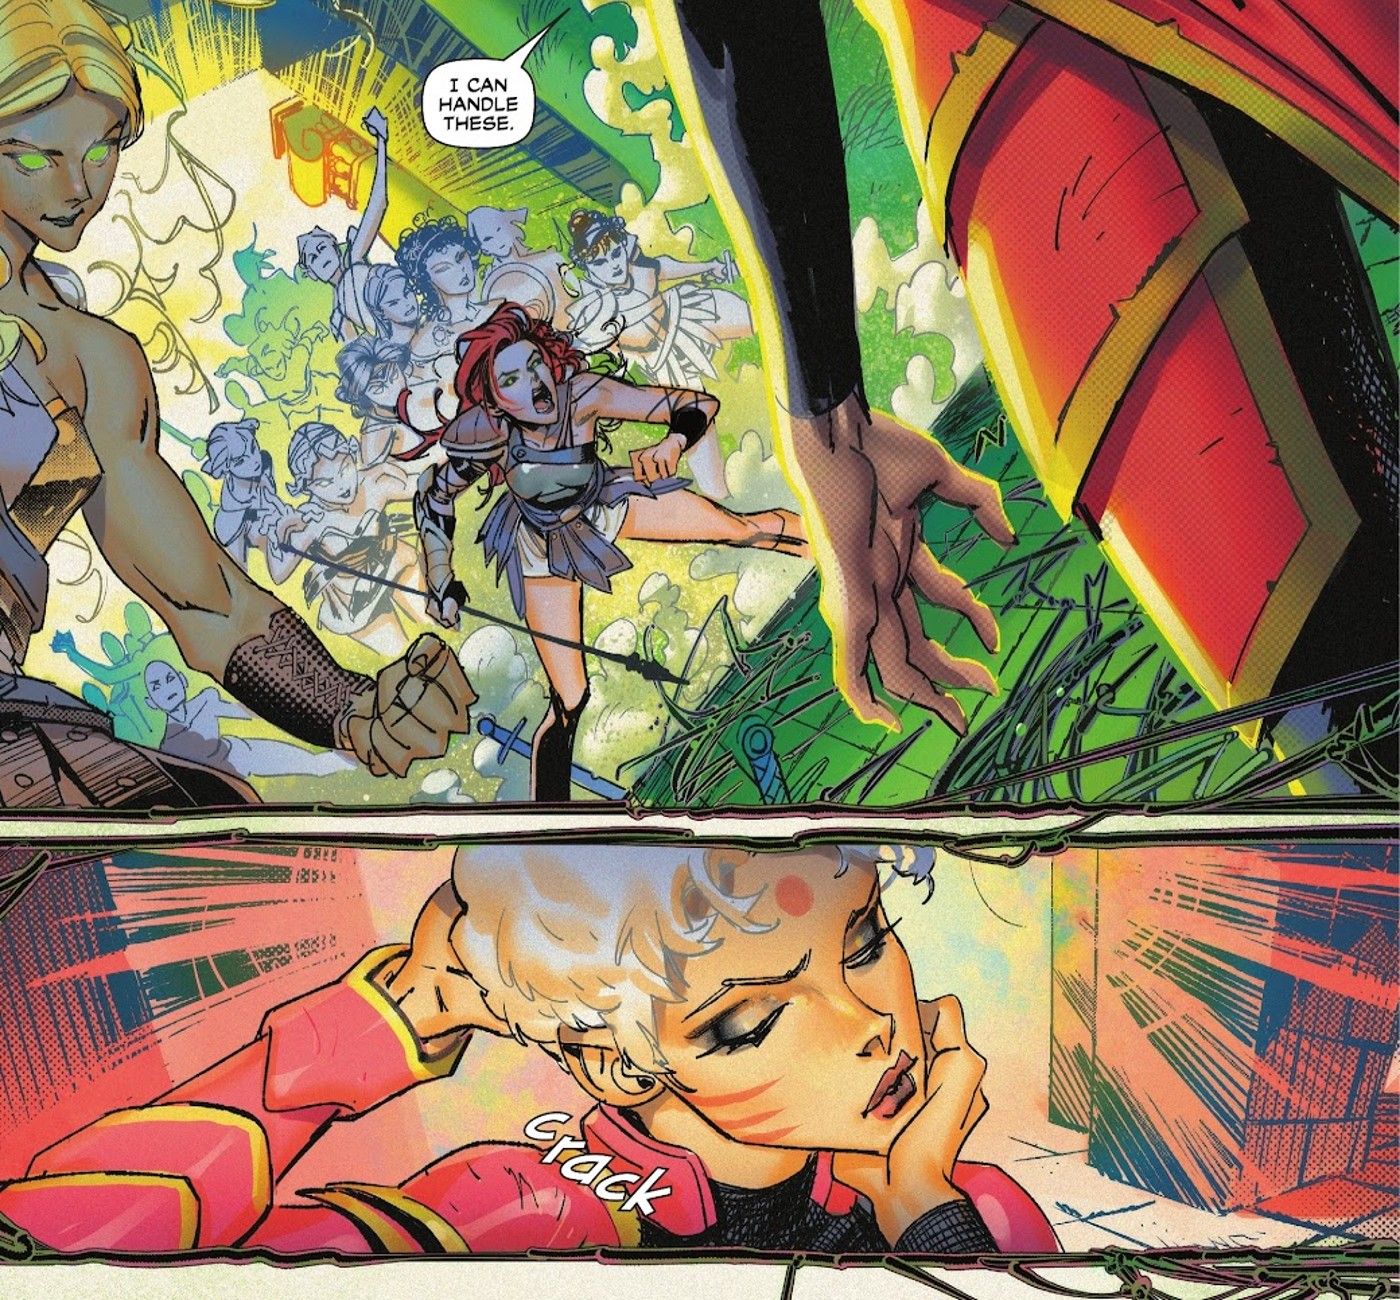 Comic book panels: Zealot of the BIrds of Prey prepares to fight Wonder Woman's Amazons